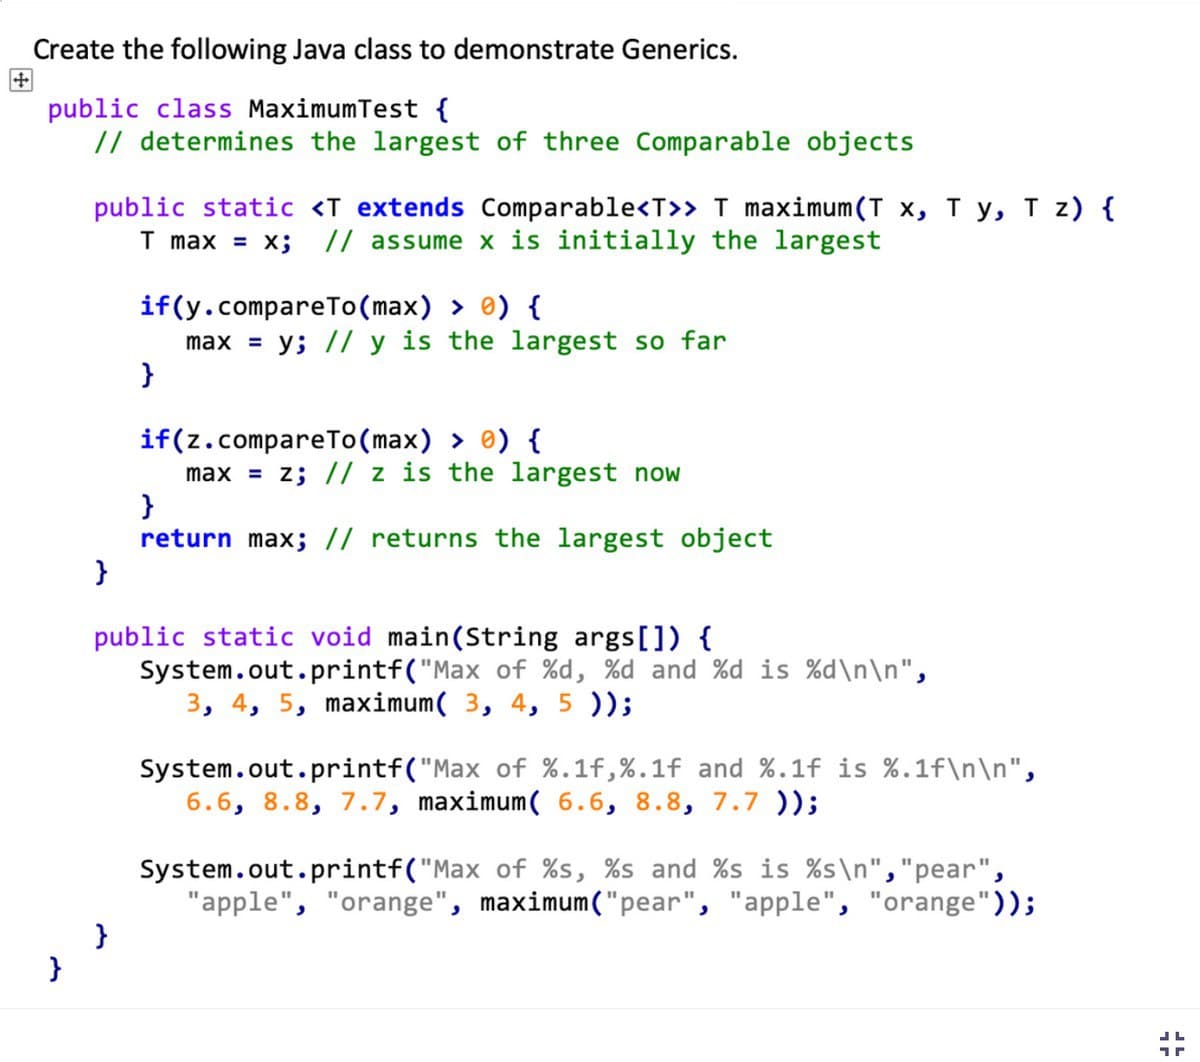 Create the following Java class to demonstrate Generics.
public class MaximumTest {
// determines the largest of three Comparable objects
}
public static <T extends Comparable<T>> T maximum (T x, Ty, T z) {
T max = x; // assume x is initially the largest
}
if(y.compareTo(max) > 0) {
max = y; // y is the largest so far
}
}
if(z.compareTo(max) > 0) {
max = z; // z is the largest now
}
return max; // returns the largest object
public static void main(String args[]) {
System.out.printf("Max of %d, %d and %d is %d\n\n",
3, 4, 5, maximum( 3, 4, 5));
System.out.printf("Max of %.1f,%.1f and %.1f is %.1f\n\n",
6.6, 8.8, 7.7, maximum( 6.6, 8.8, 7.7 ));
System.out.printf("Max of %s, %s and %s is %s\n", "pear",
"apple", "orange", maximum ("pear", "apple", "orange"));
JL
17